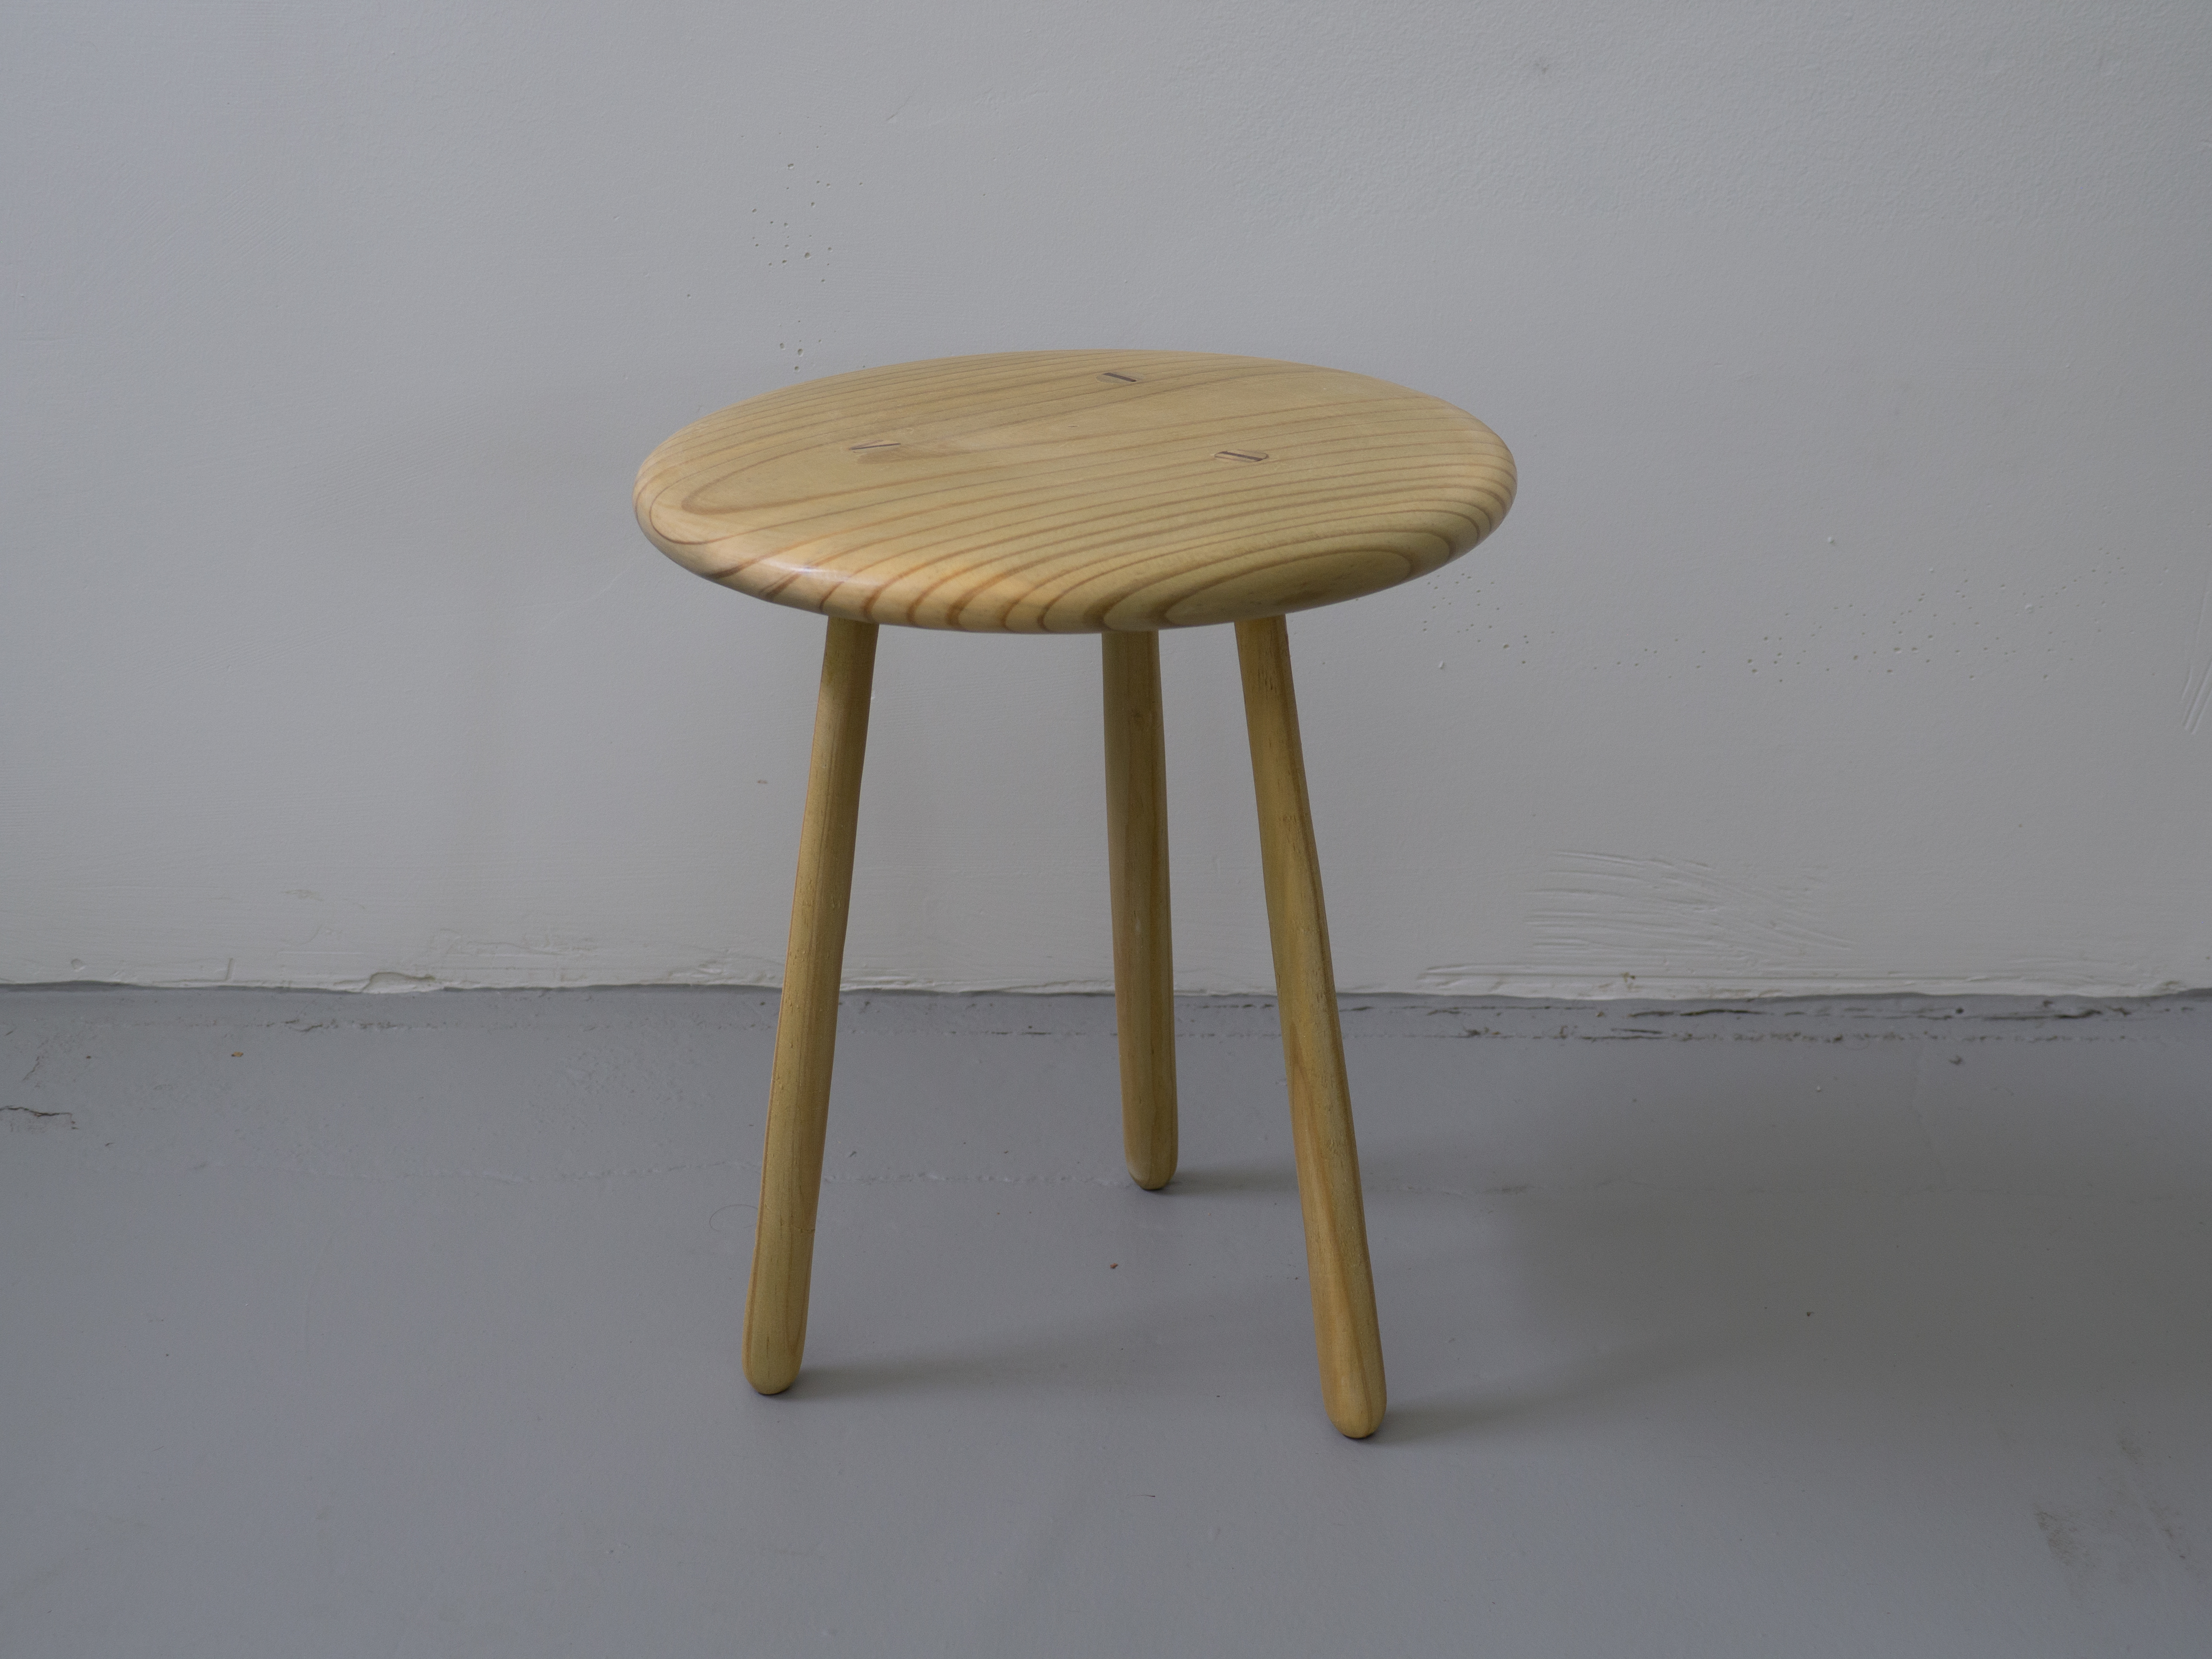 small wooden stool with three legs of light wood